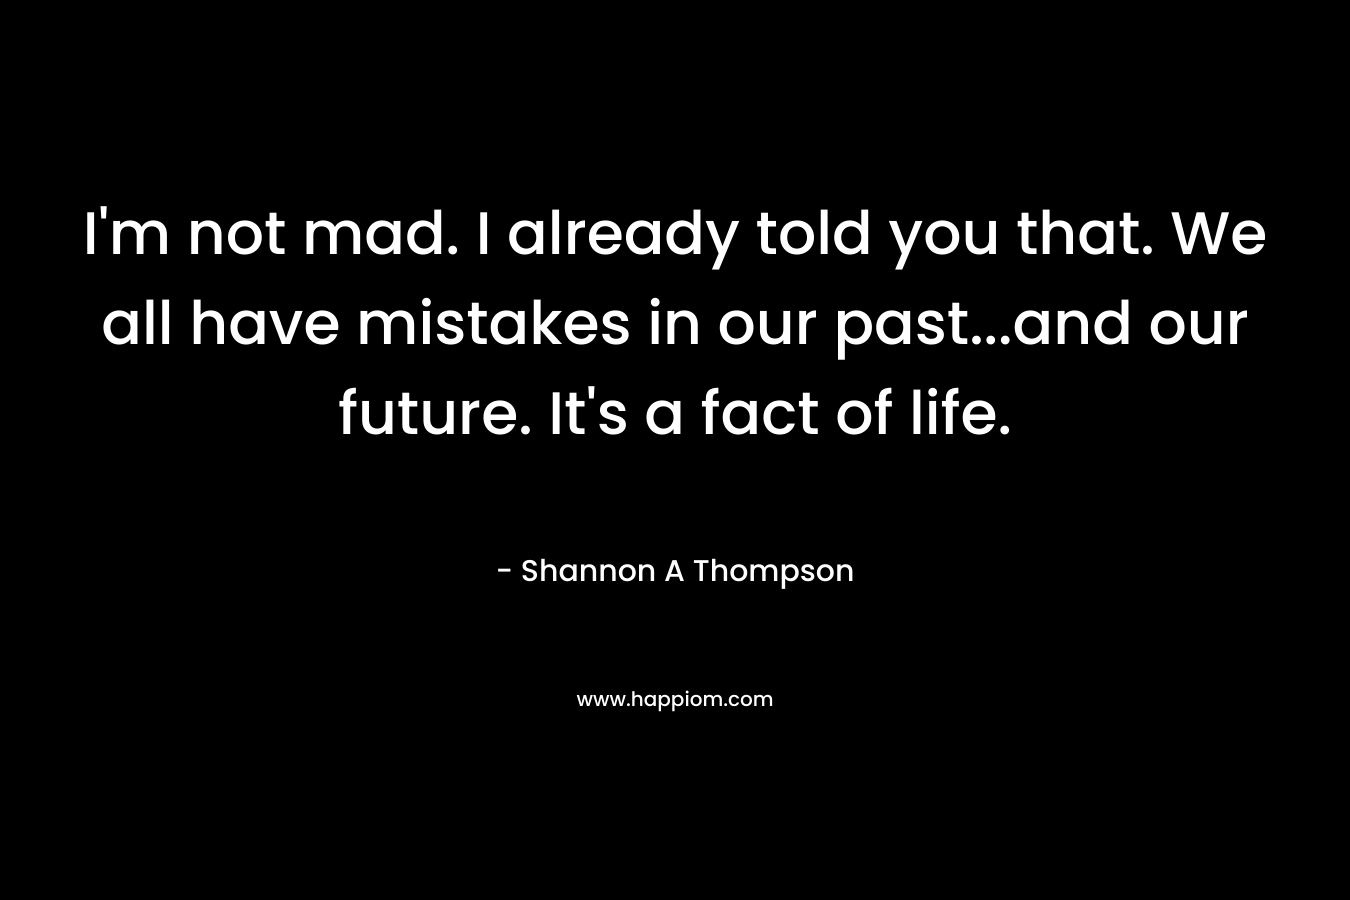 I'm not mad. I already told you that. We all have mistakes in our past...and our future. It's a fact of life.